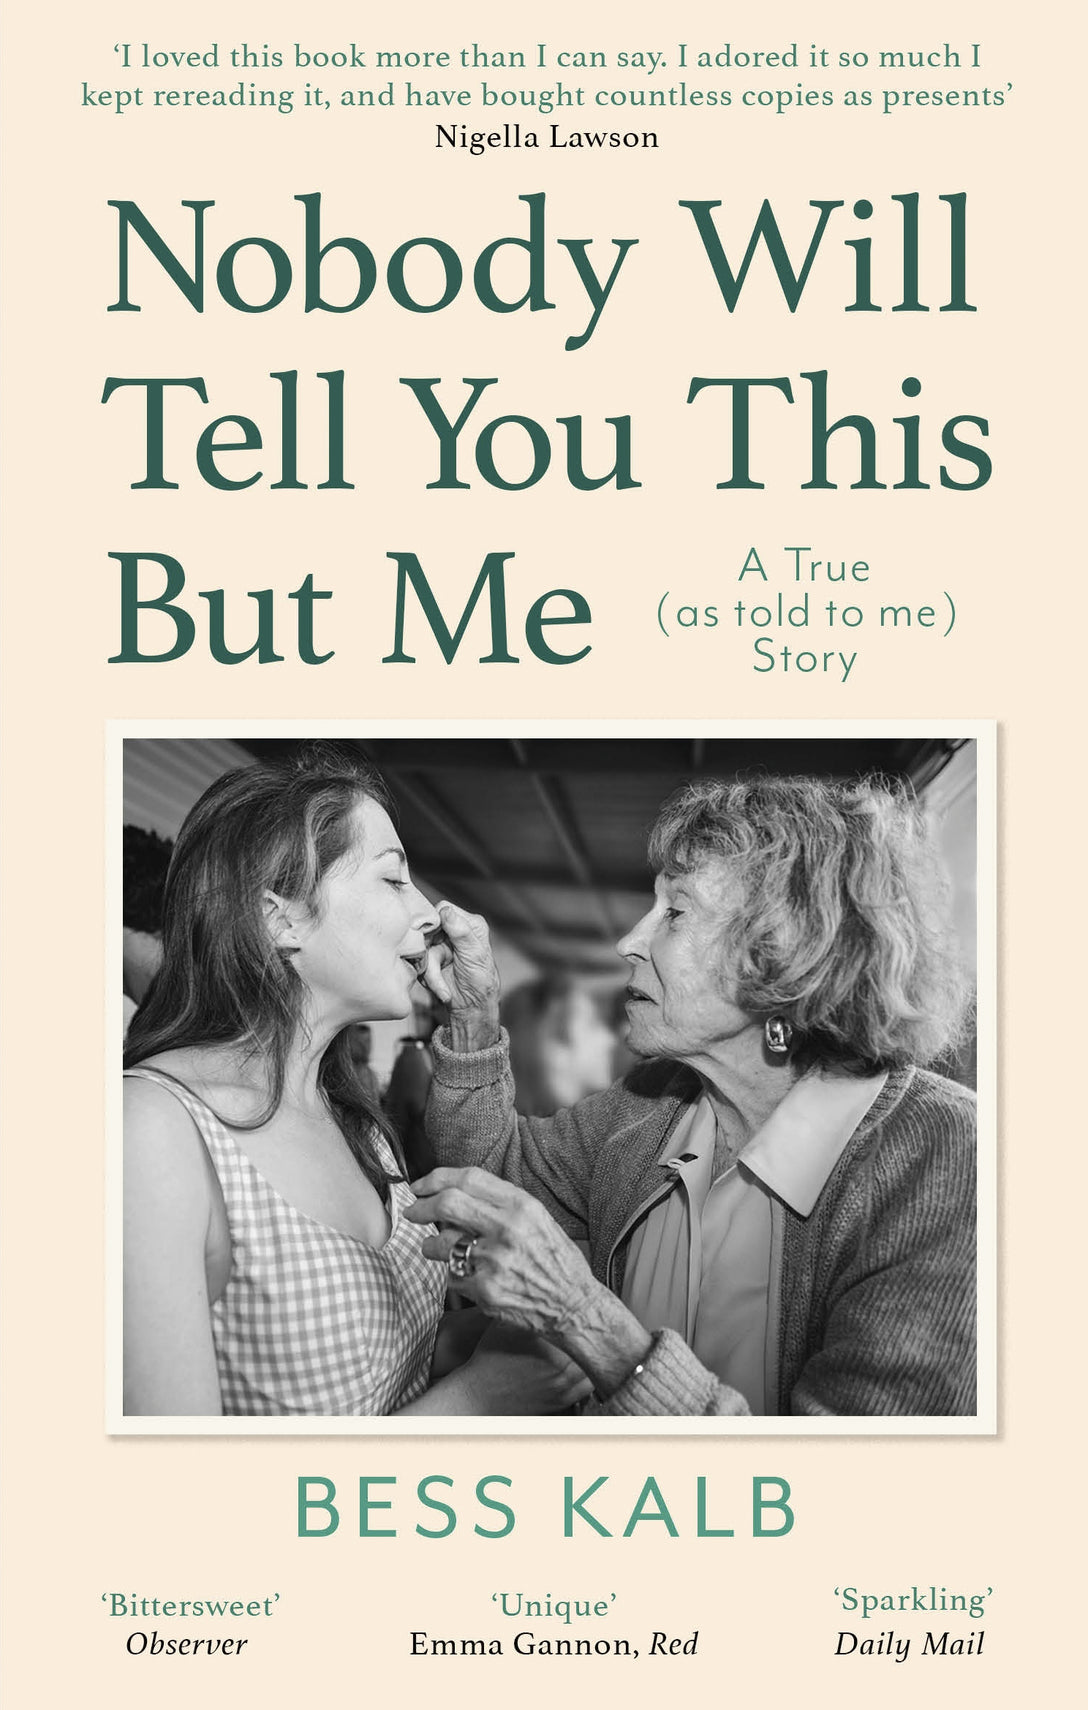 Nobody Will Tell You This But Me by Bess Kalb